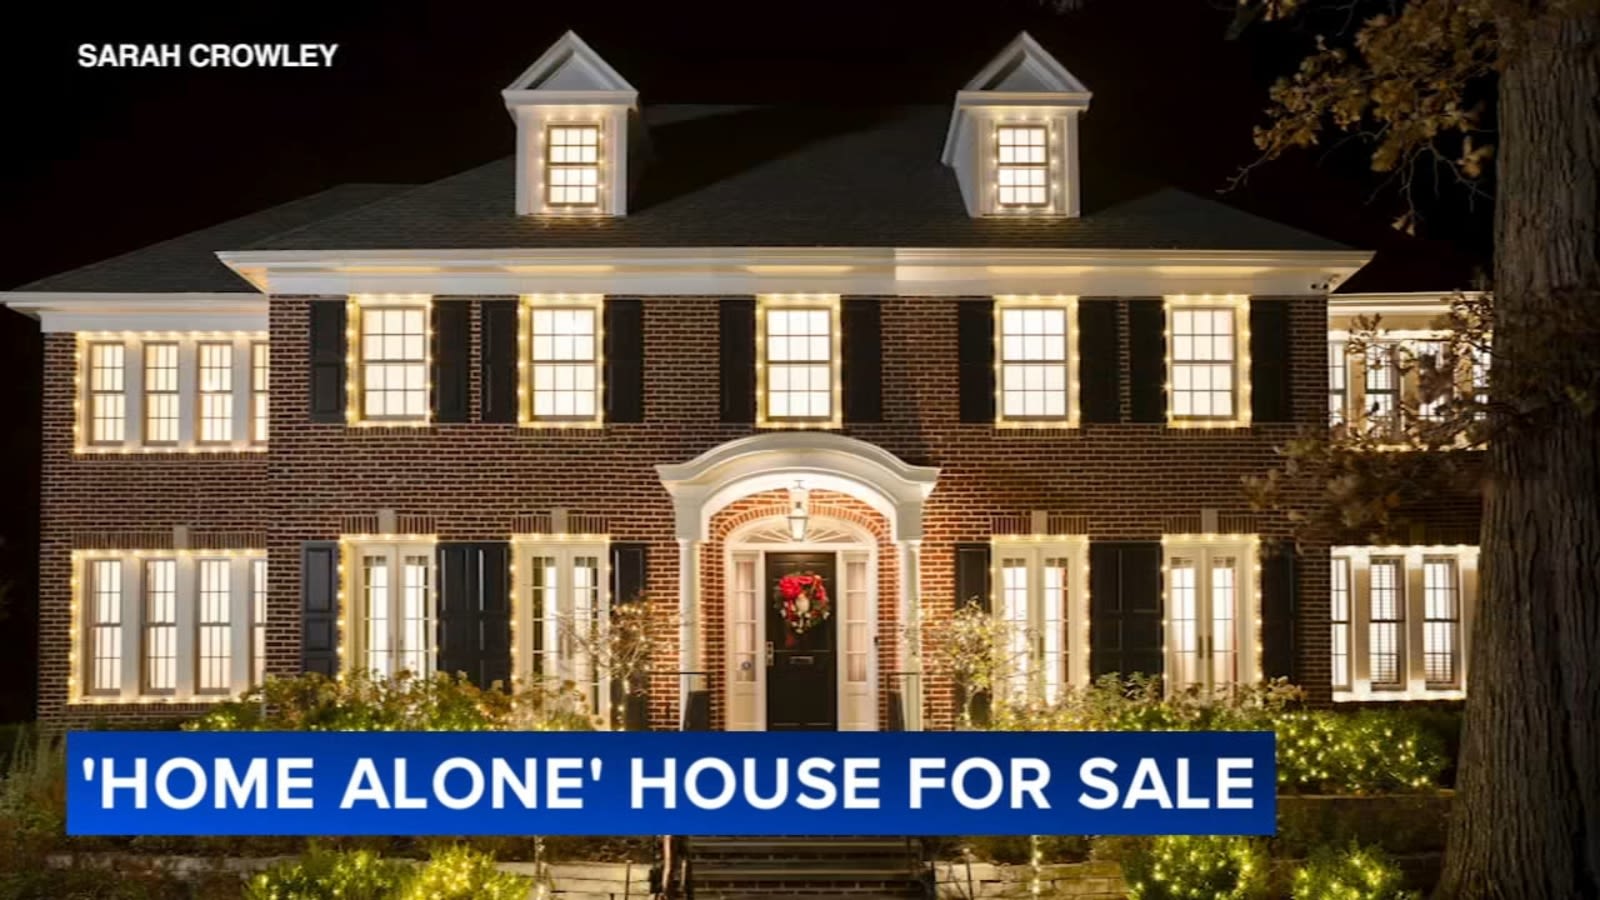 Winnetka house from 'Home Alone' listed for sale at $5.25 million